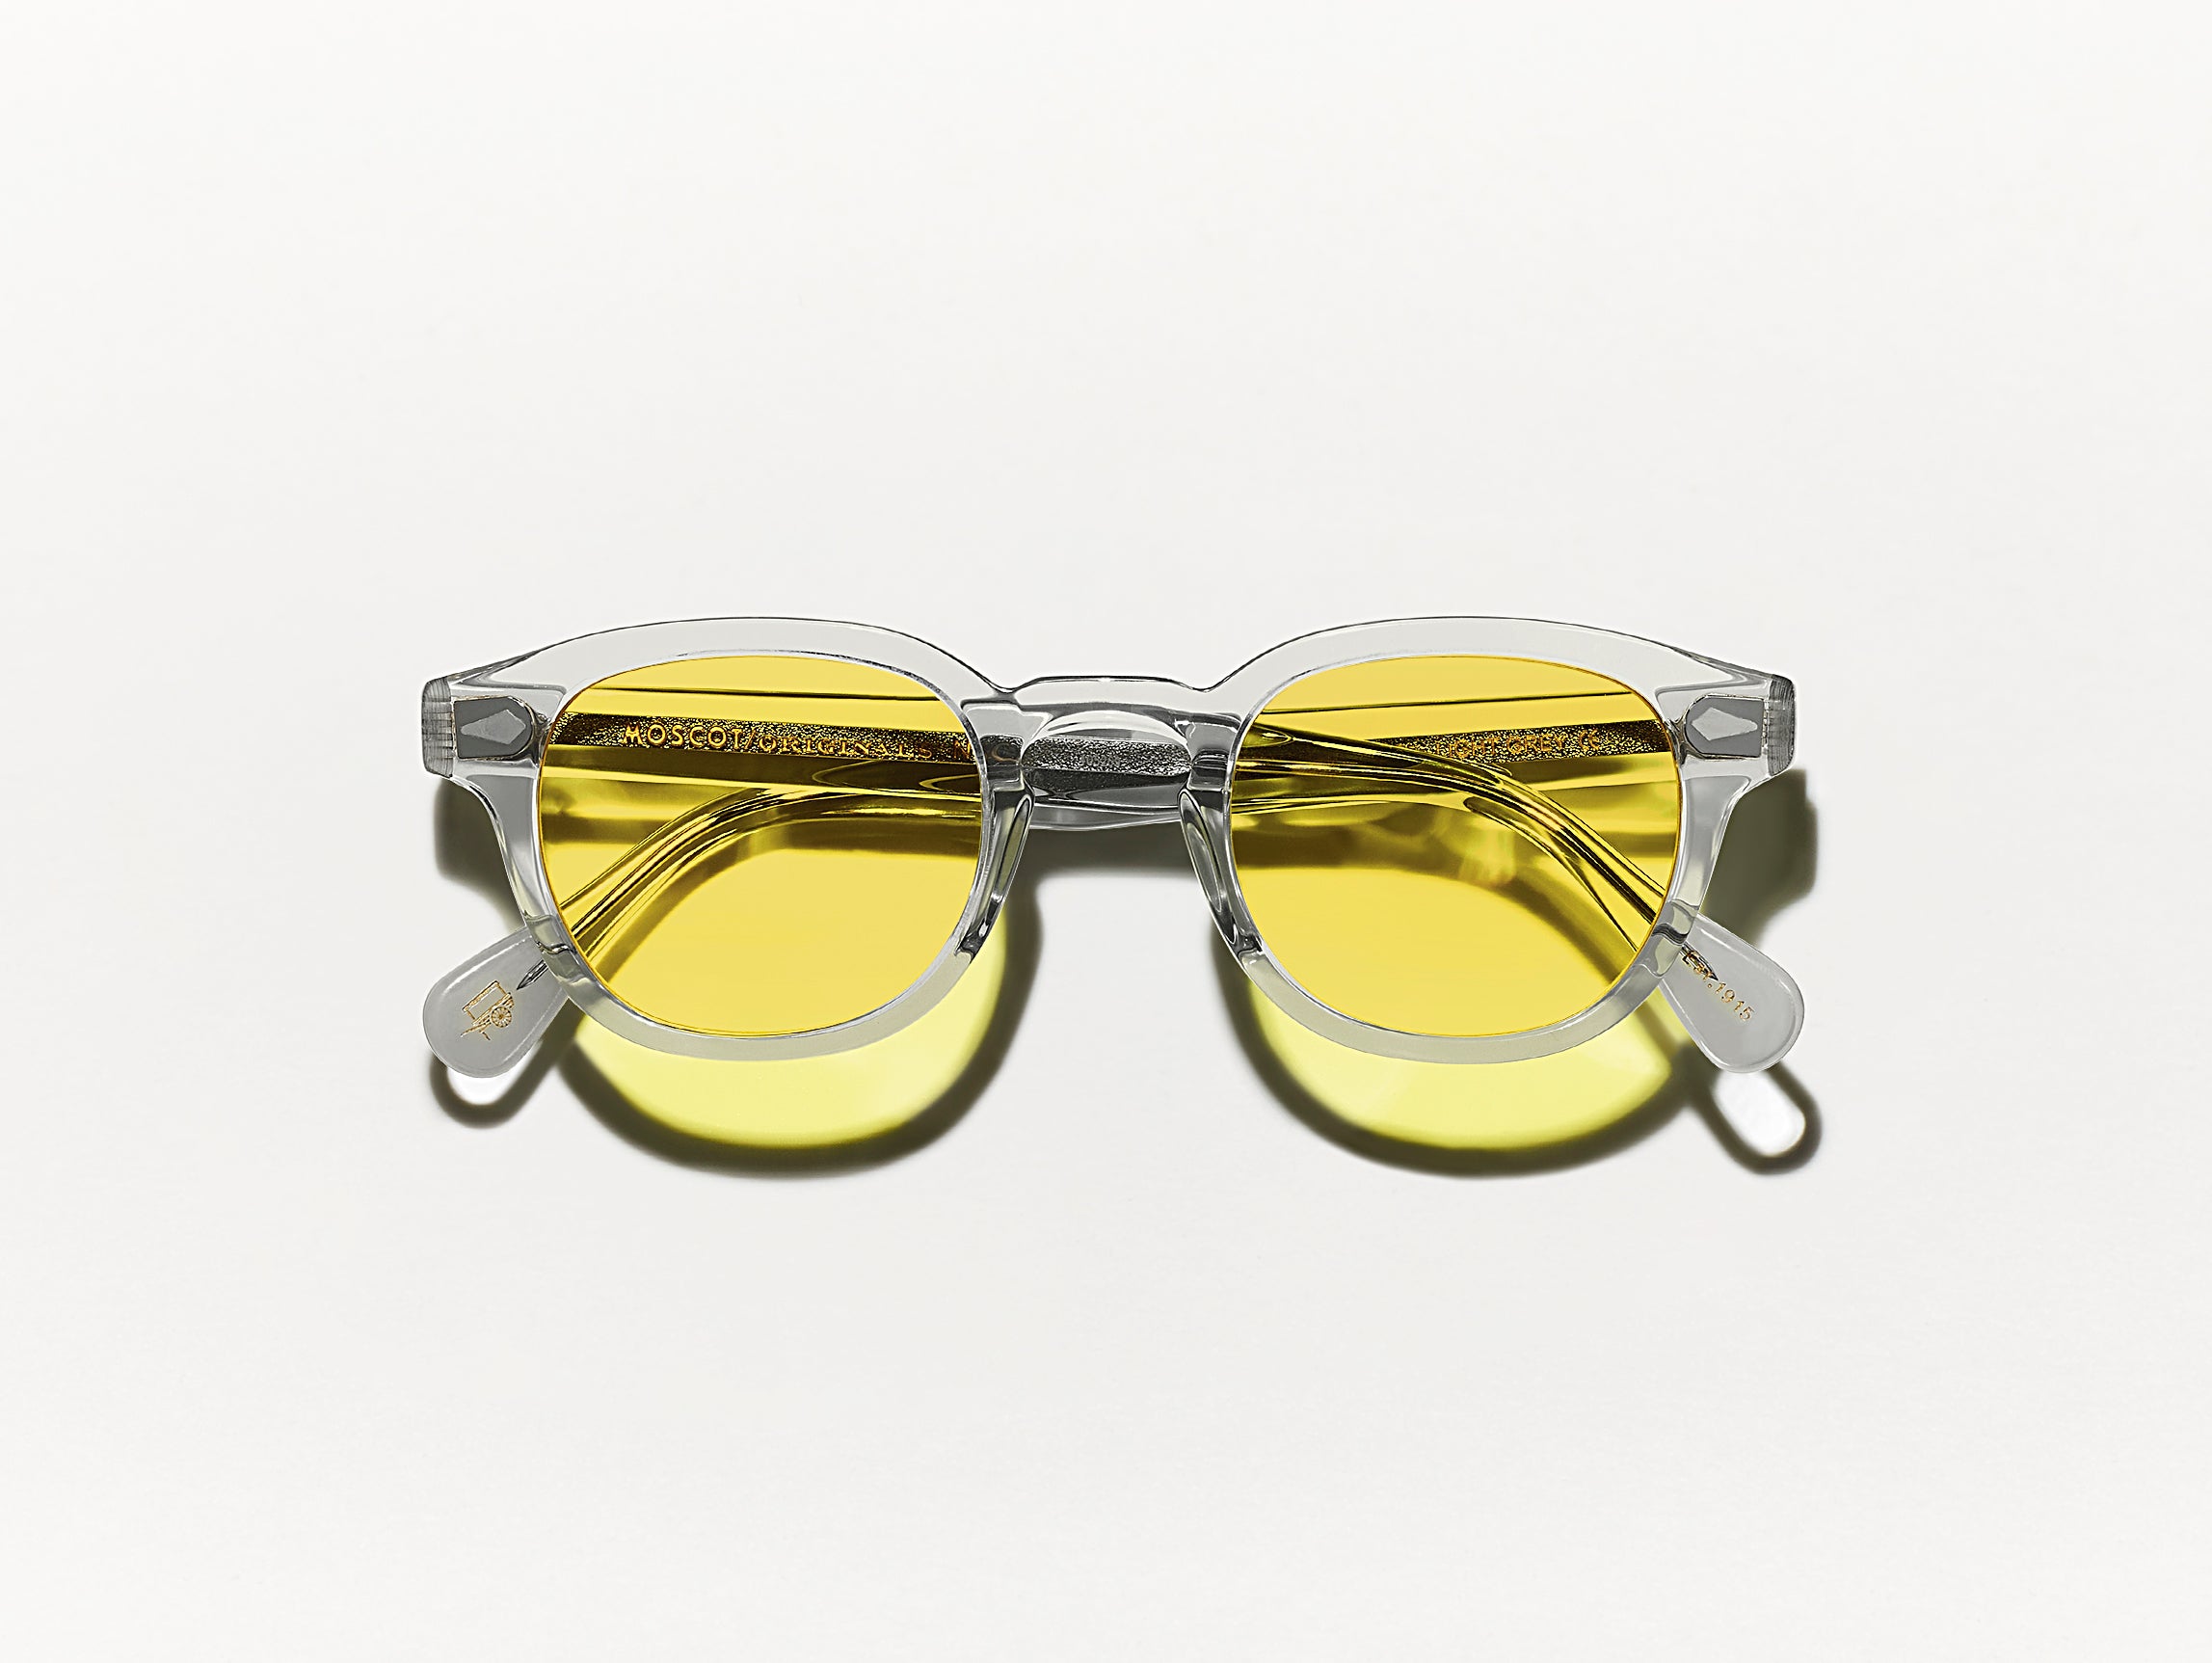 The LEMTOSH Light Grey with Mellow Yellow Tinted Lenses